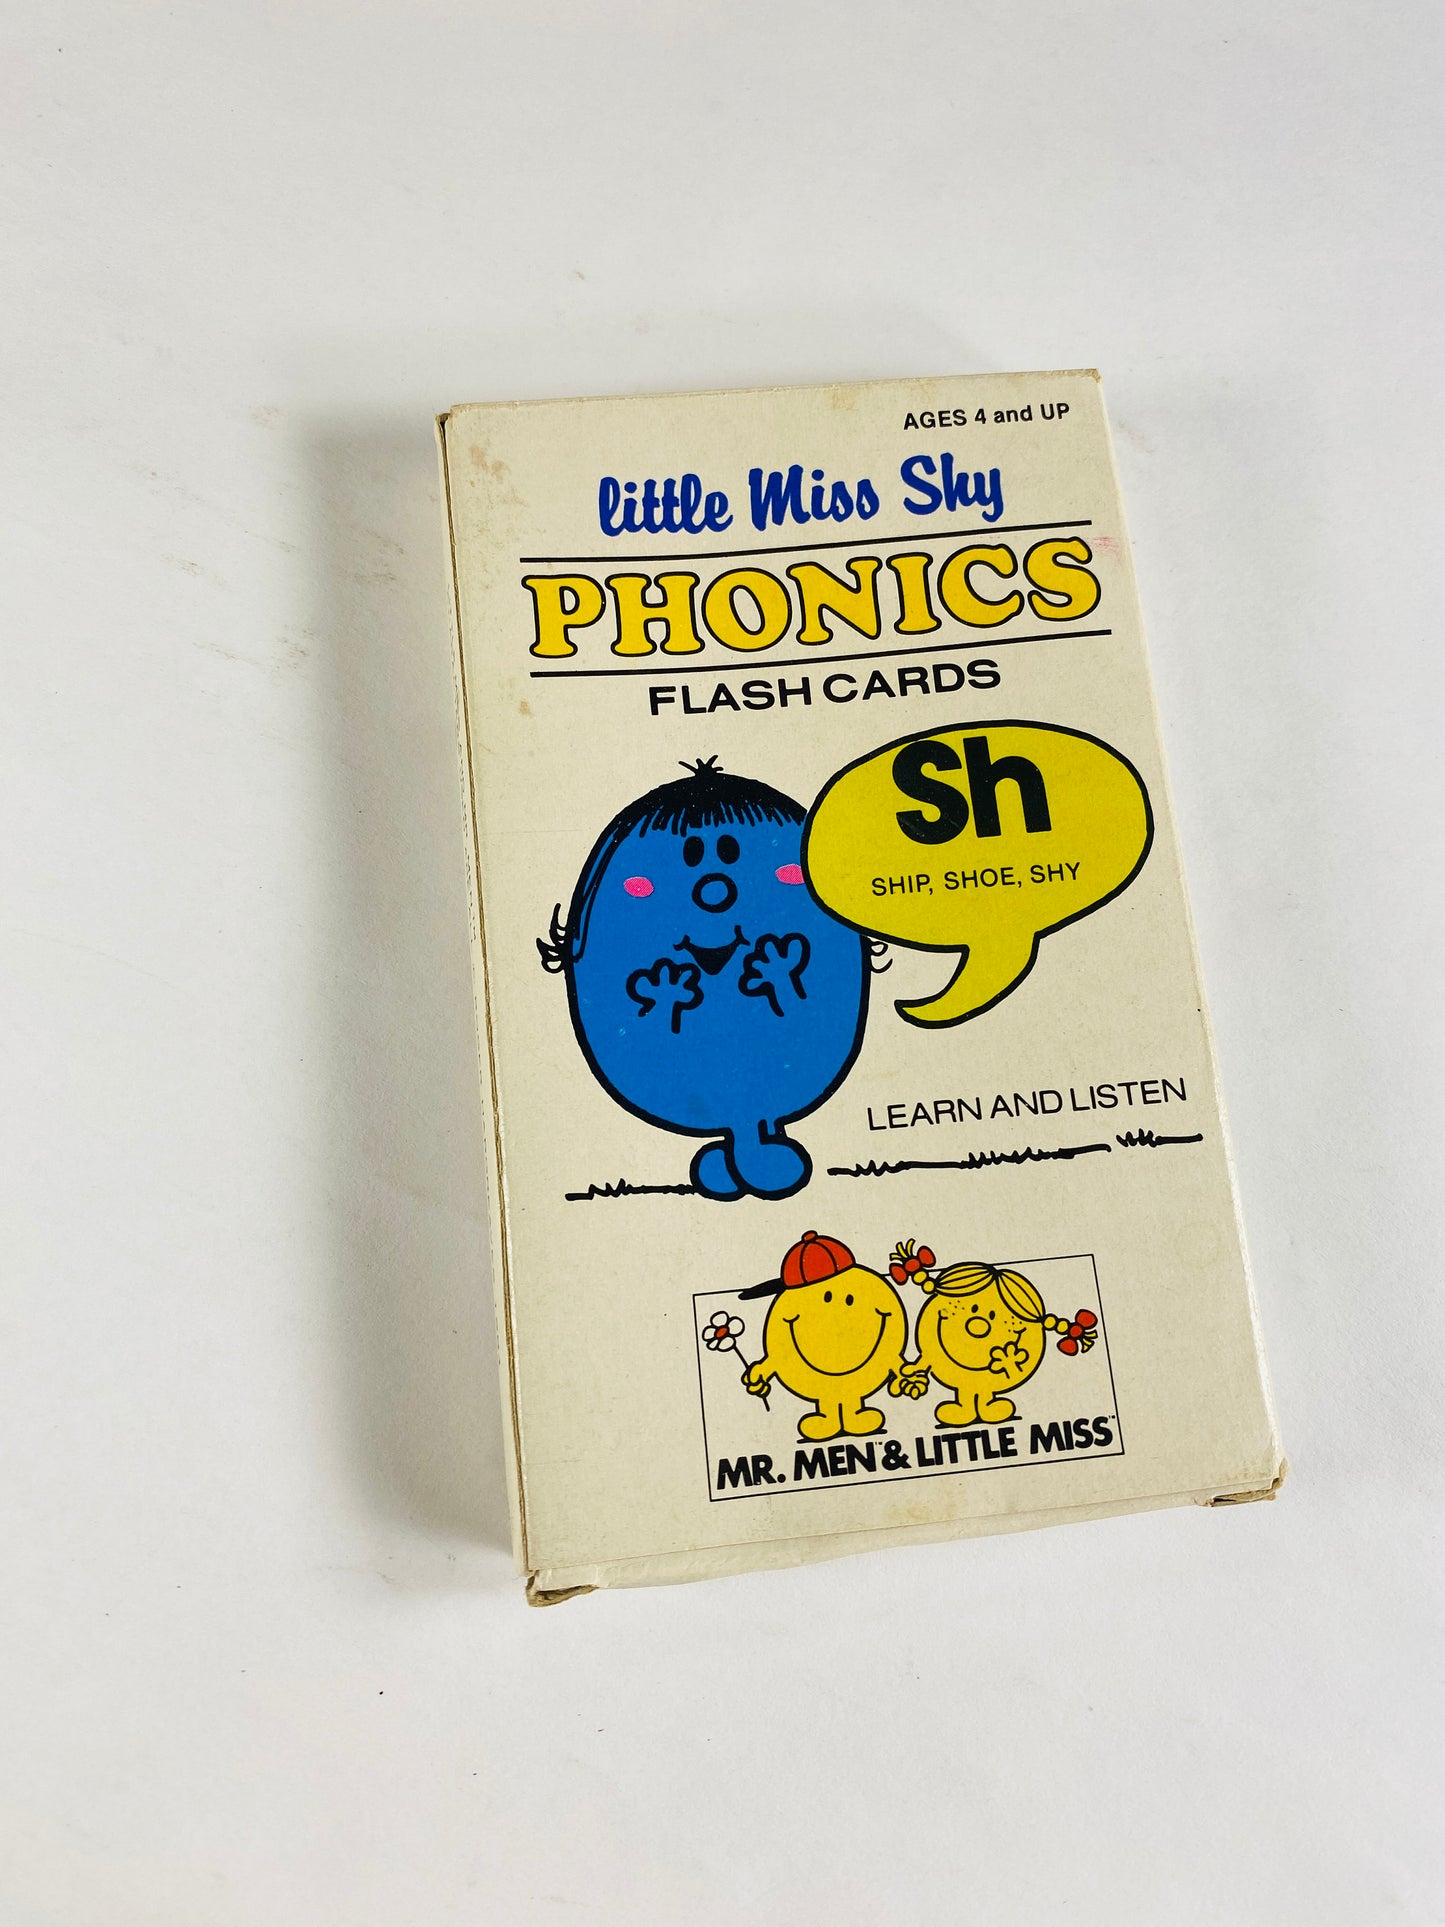 Mr Men vintage phonics Flash cards Miss Sky circa 1984 Little Miss Roger Hargreaves vowels consonants and double consanants